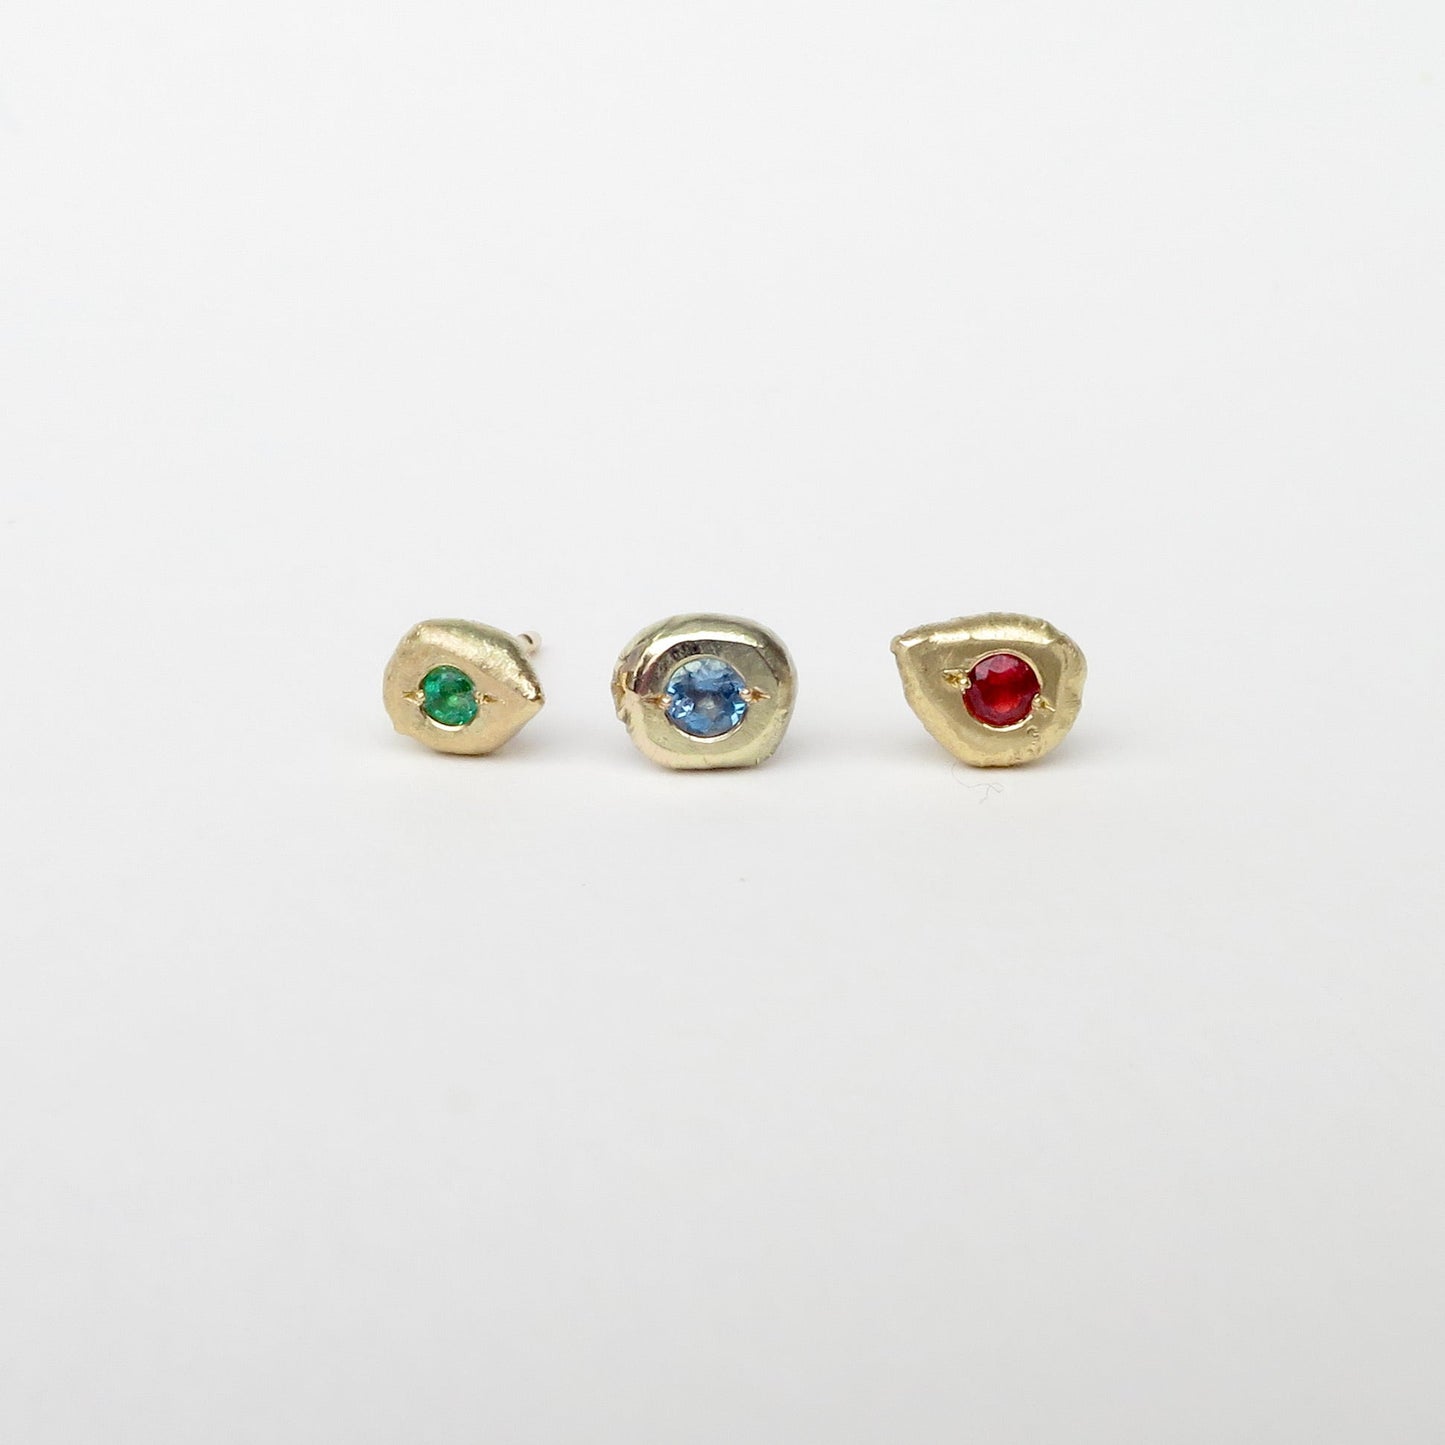 Freeform 9ct gold stud with spinel